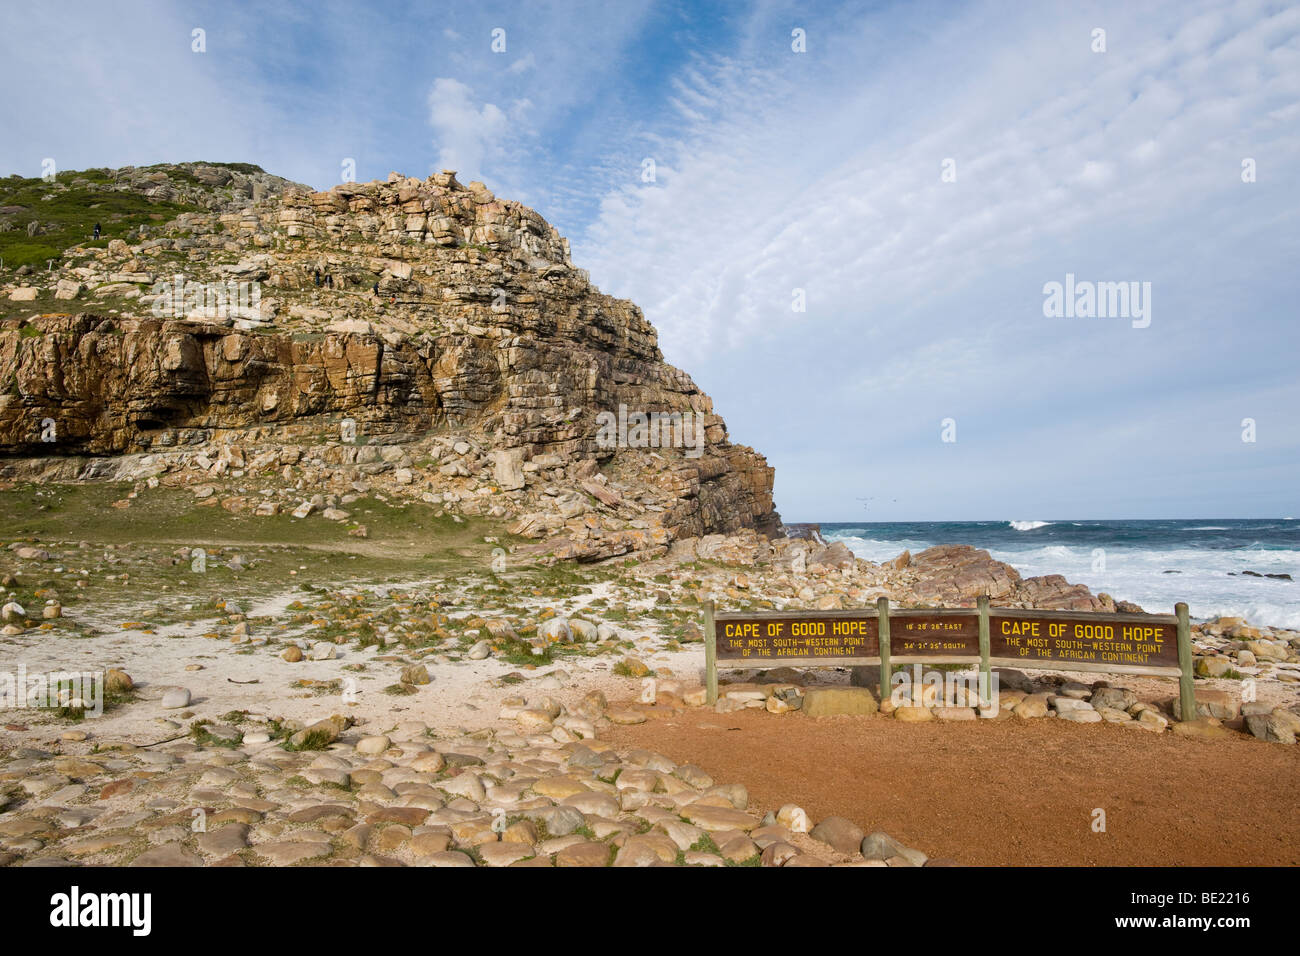 Cape of Good Hope - South Africa Stock Photo